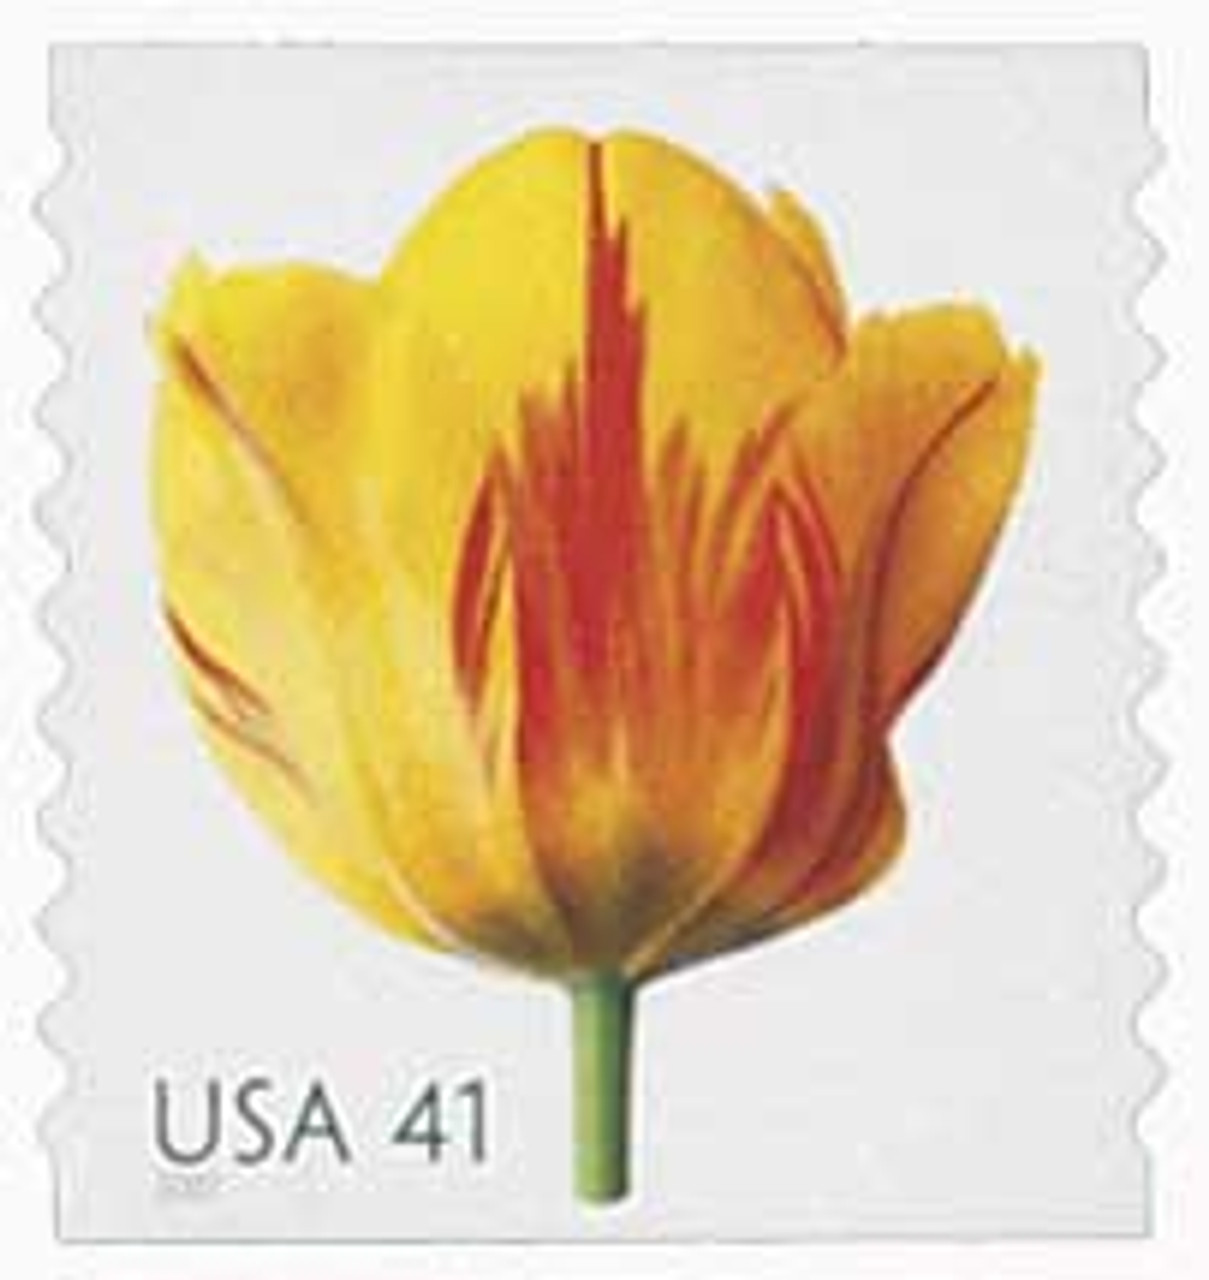 4166-75 - 2007 41c Beautiful Blooms, coil - Mystic Stamp Company